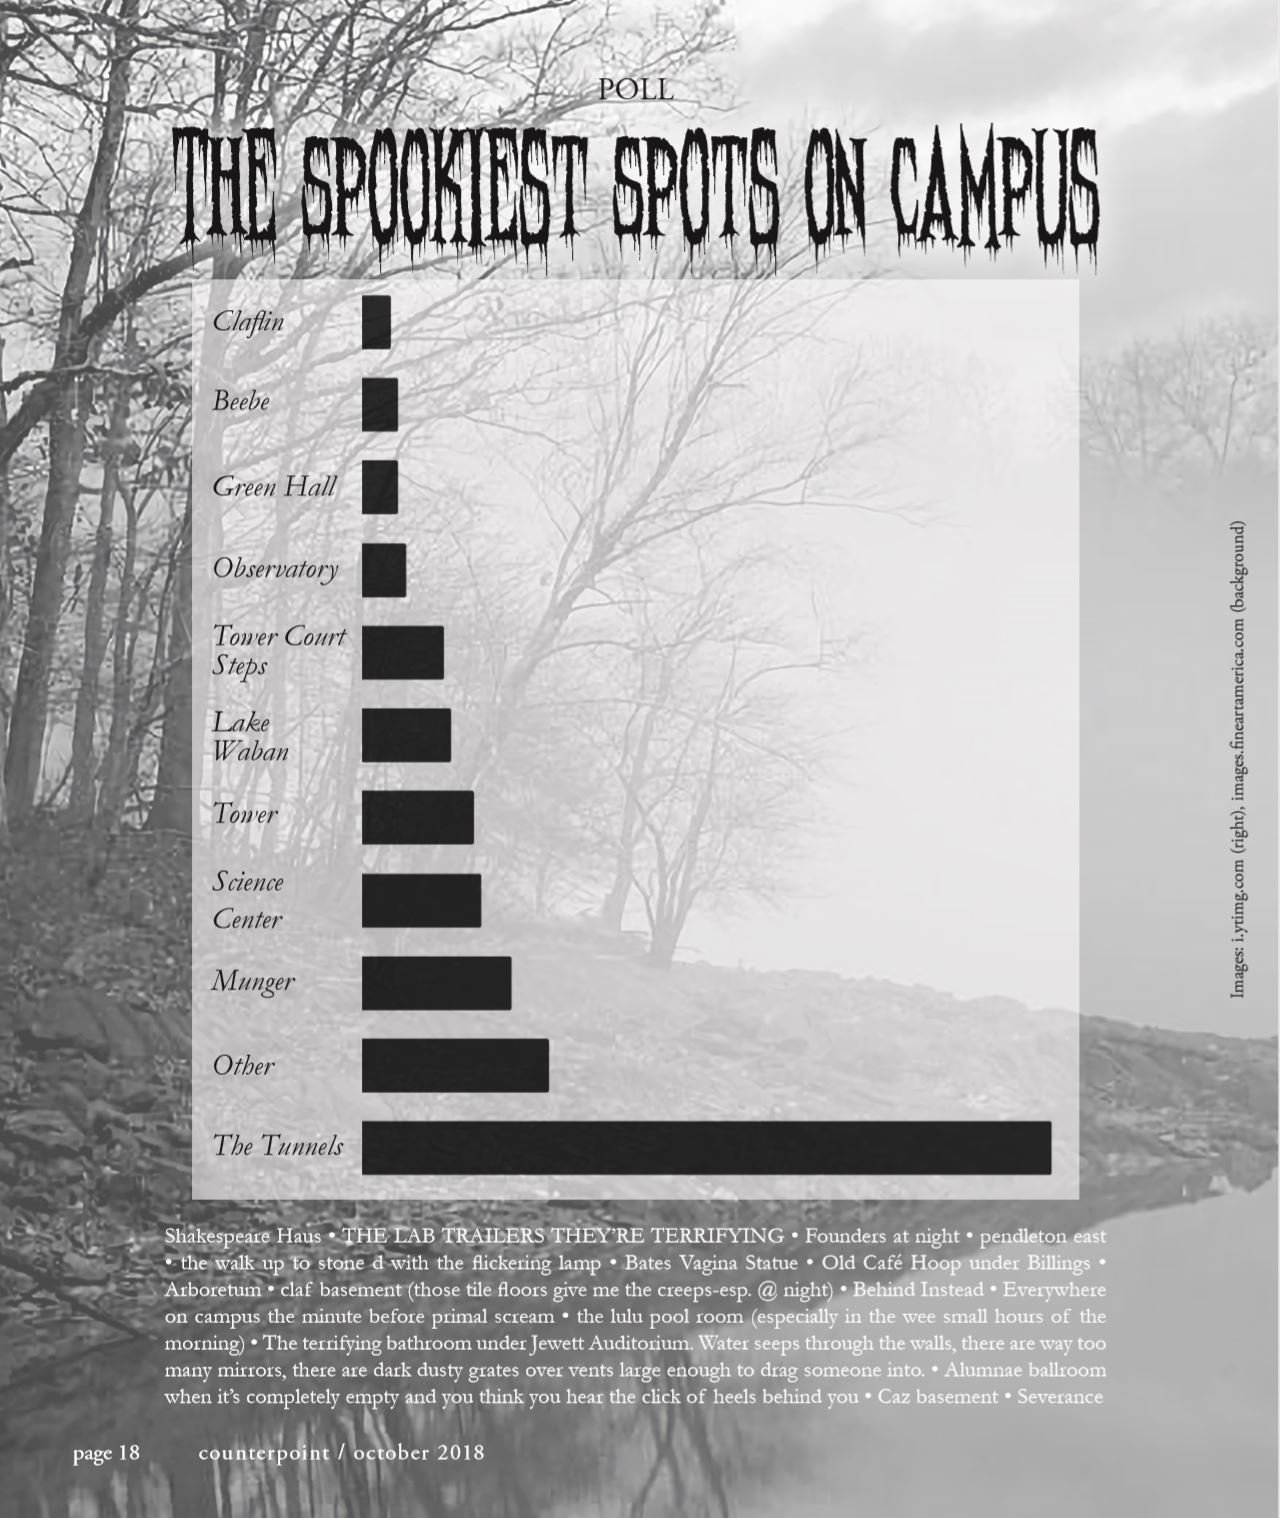 The Spookiest Spots on Campus